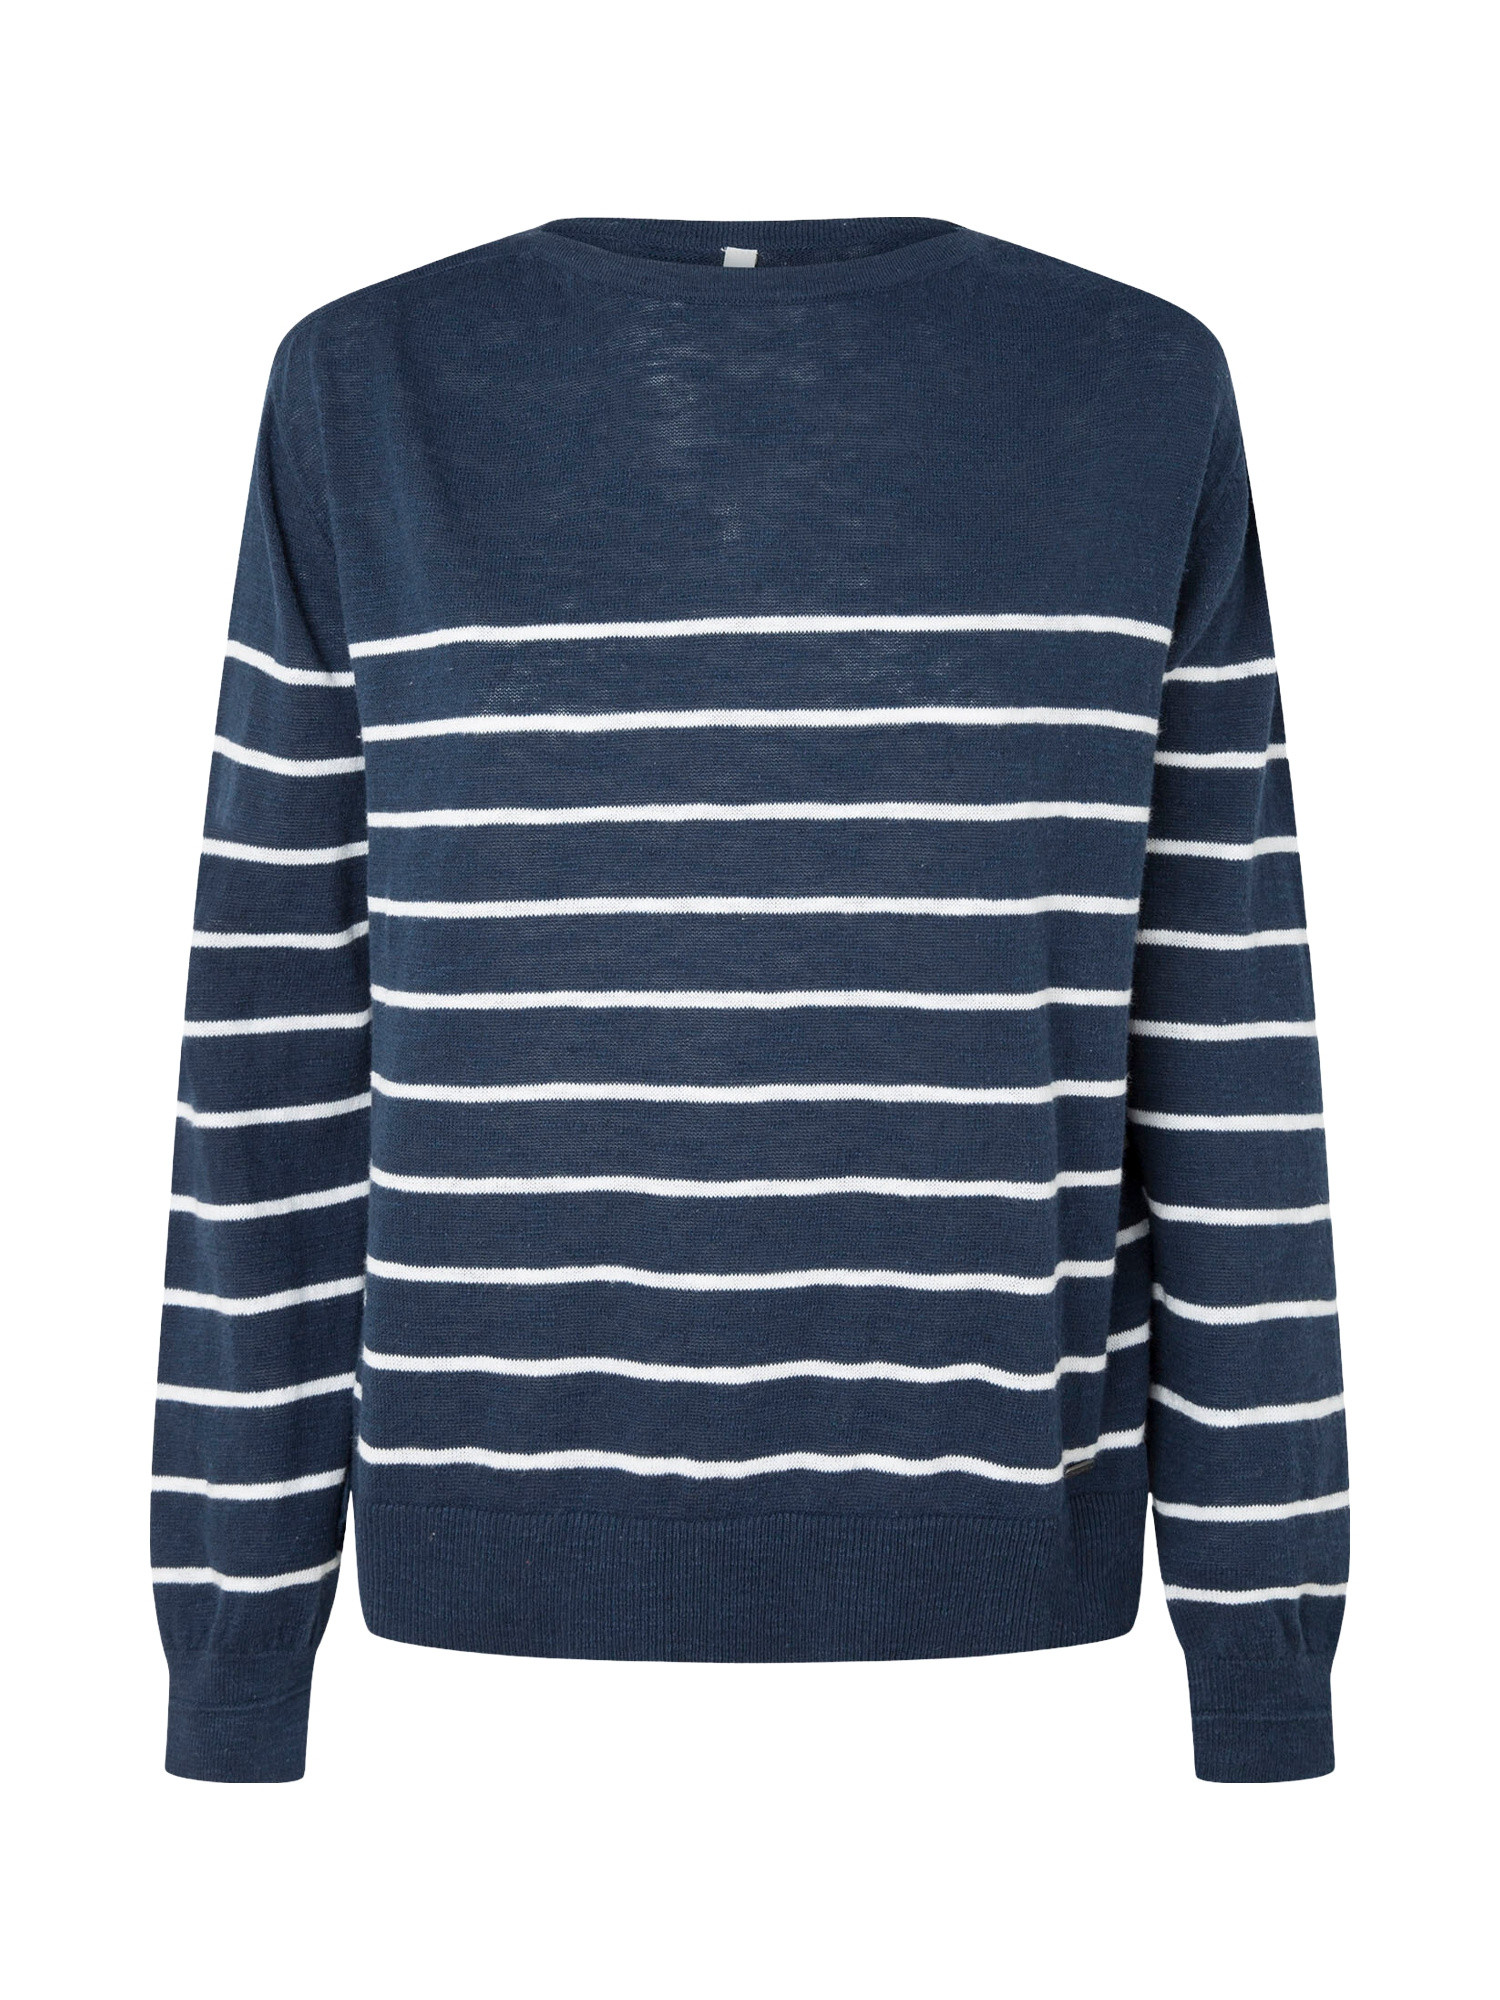 Pepe Jeans - Pullover a righe, Blu scuro, large image number 0